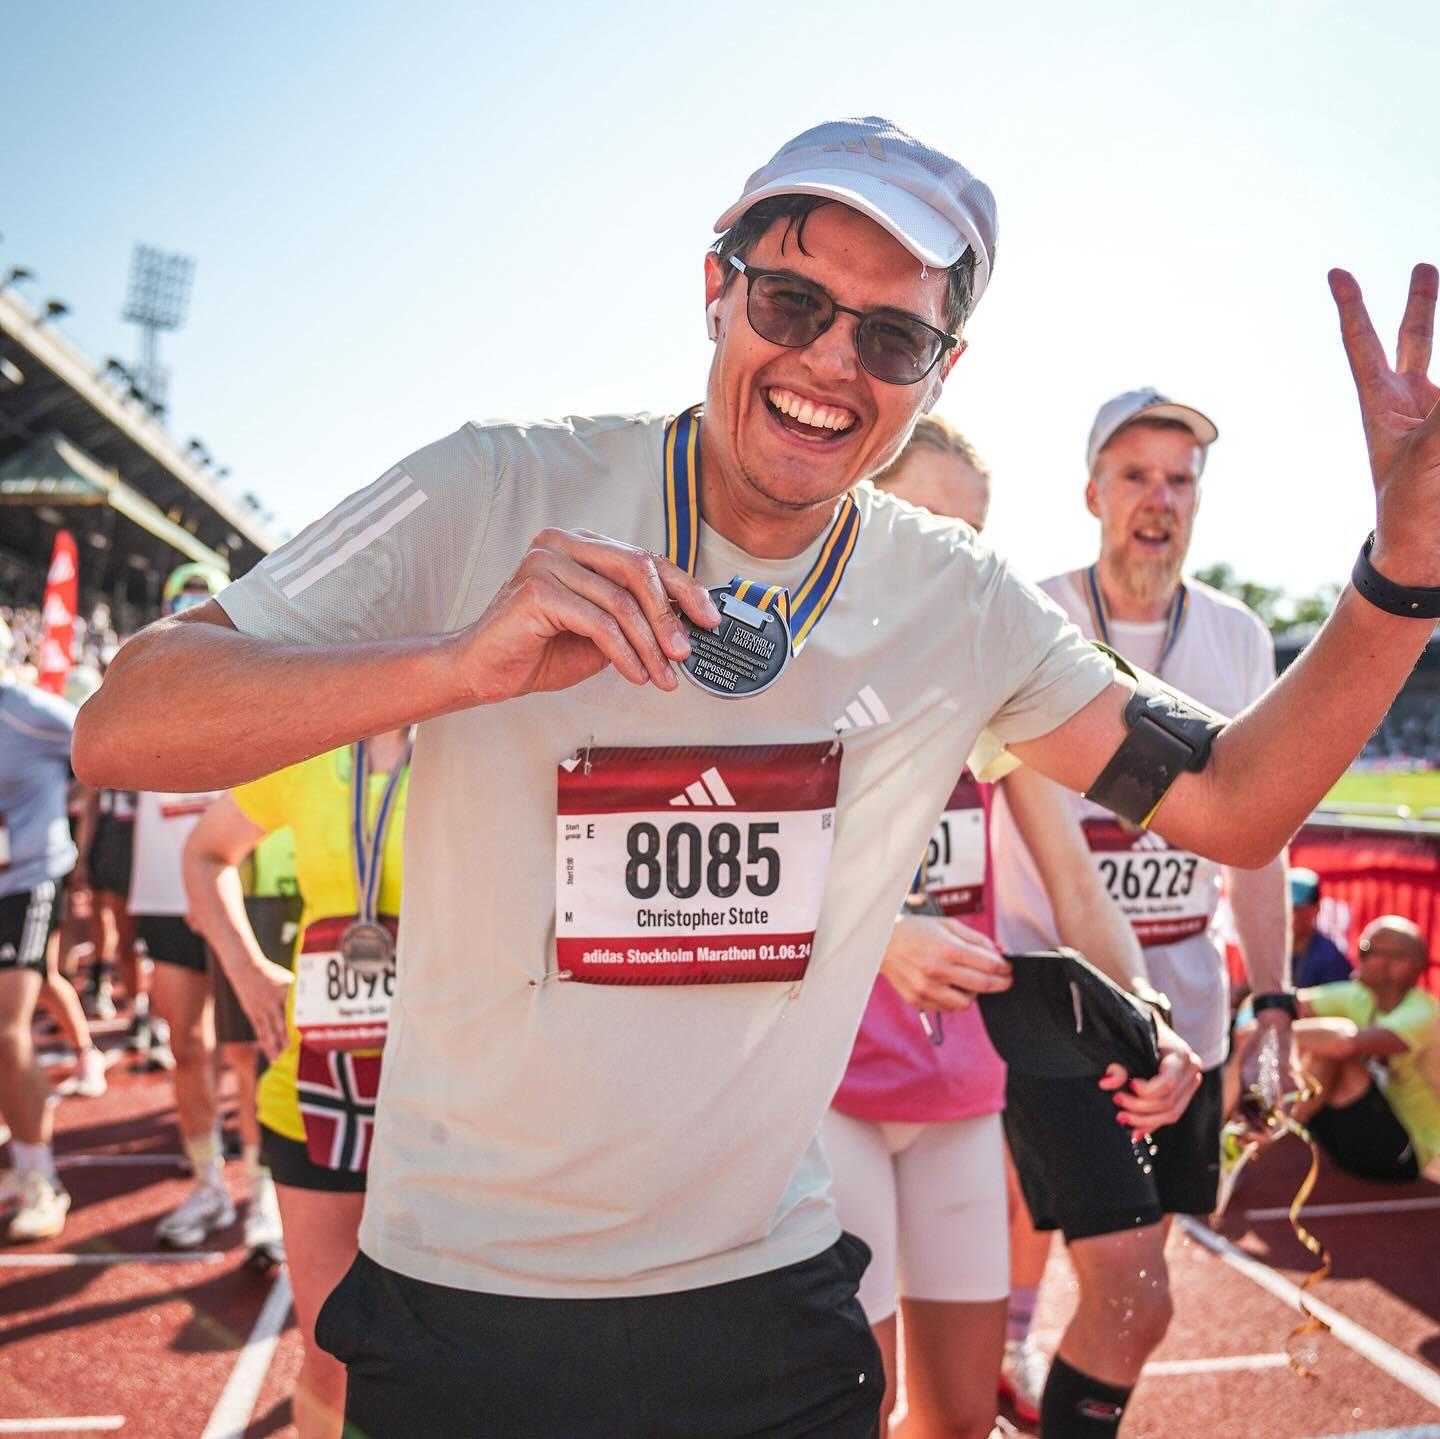 A smiling marathon runner, Christopher State, holds his medal proudly at the finish line of the Adidas Stockholm Marathon. He is wearing sunglasses, a white cap, and a light-colored shirt with the race number 8085. Other runners and spectators are visible in the background under a clear sky.